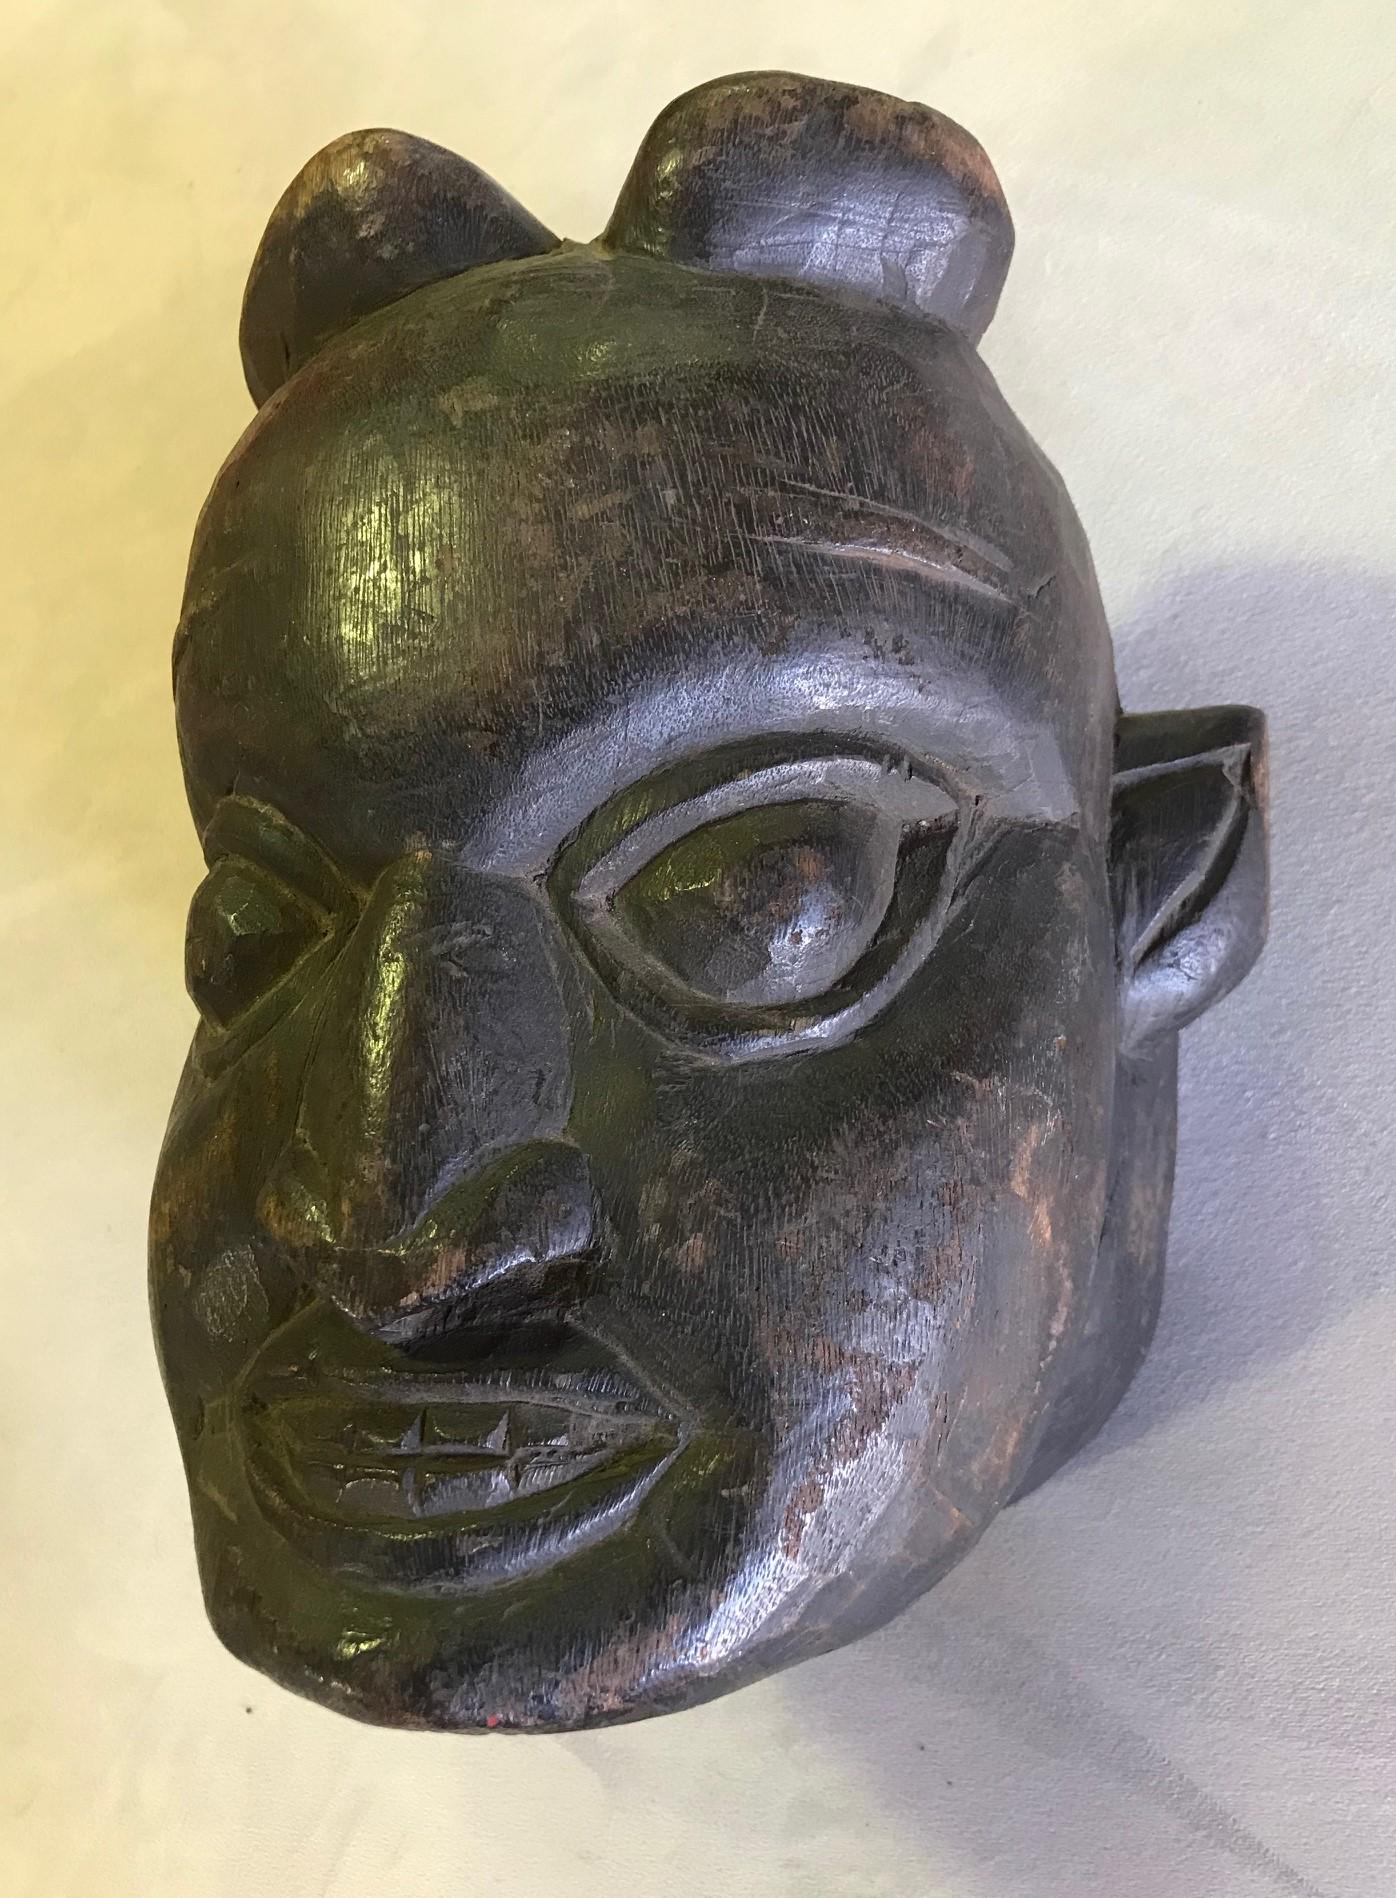 A wonderfully carved, heavy tribal mask. The mask is from the collection of famed American writer Gore Vidal who was an avid collector of tribal masks and artifacts. It was listed as being from Papua New Guinea but could be from another region.